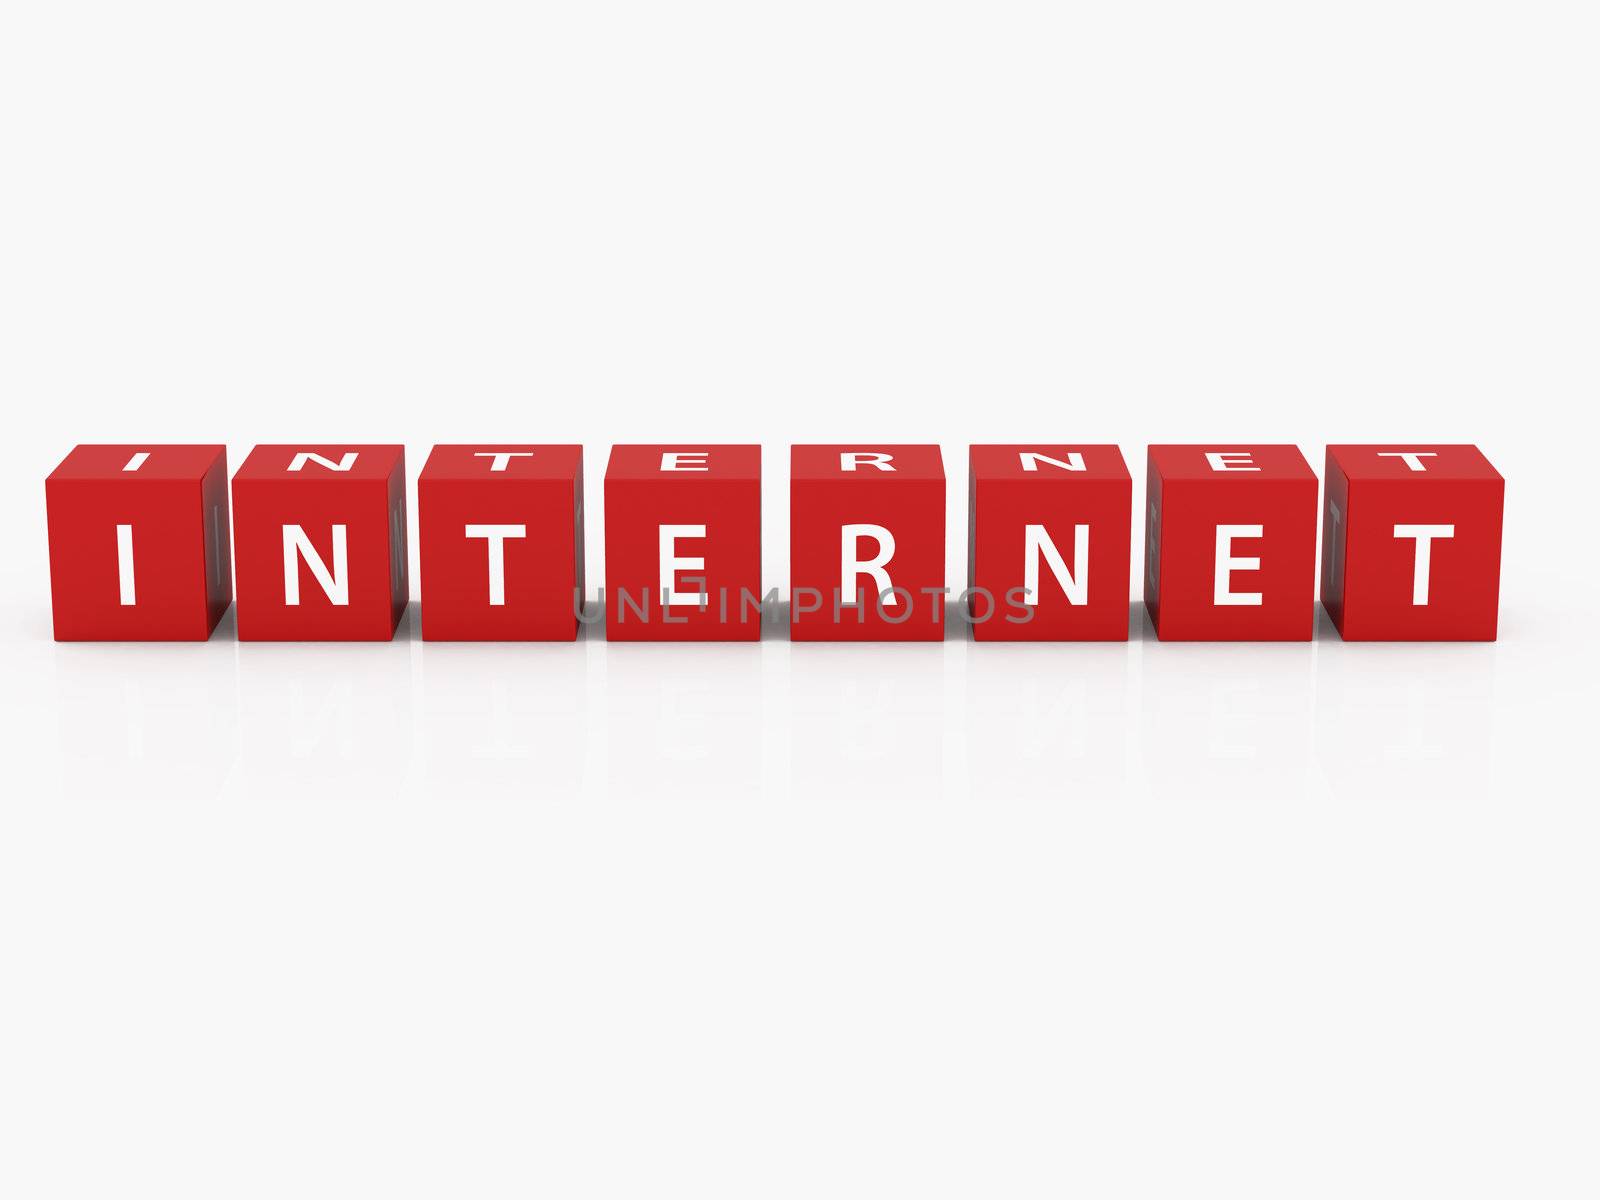 Internet letters in red blocks on white background.